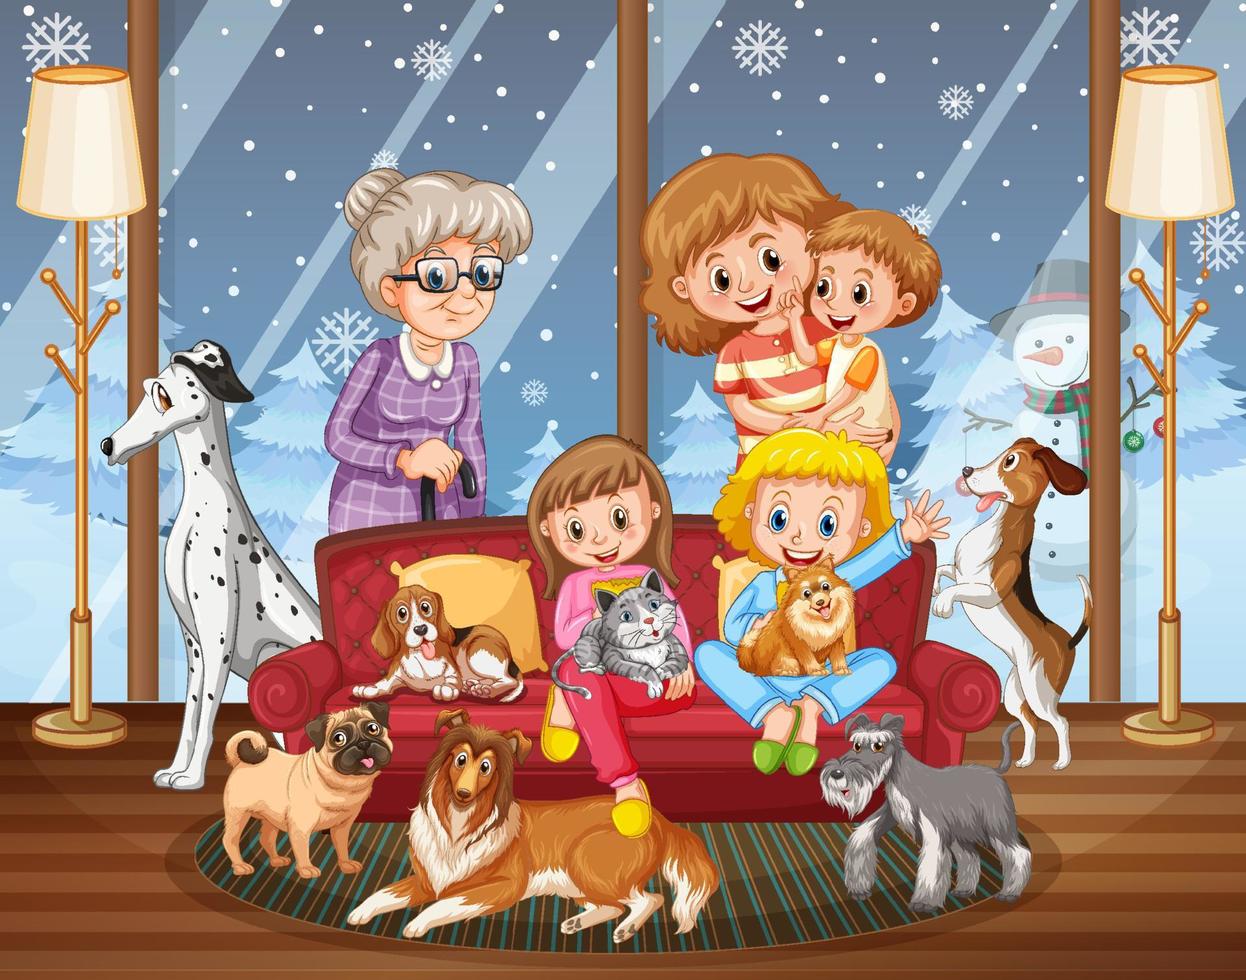 Family members with their pet in the living room scene vector